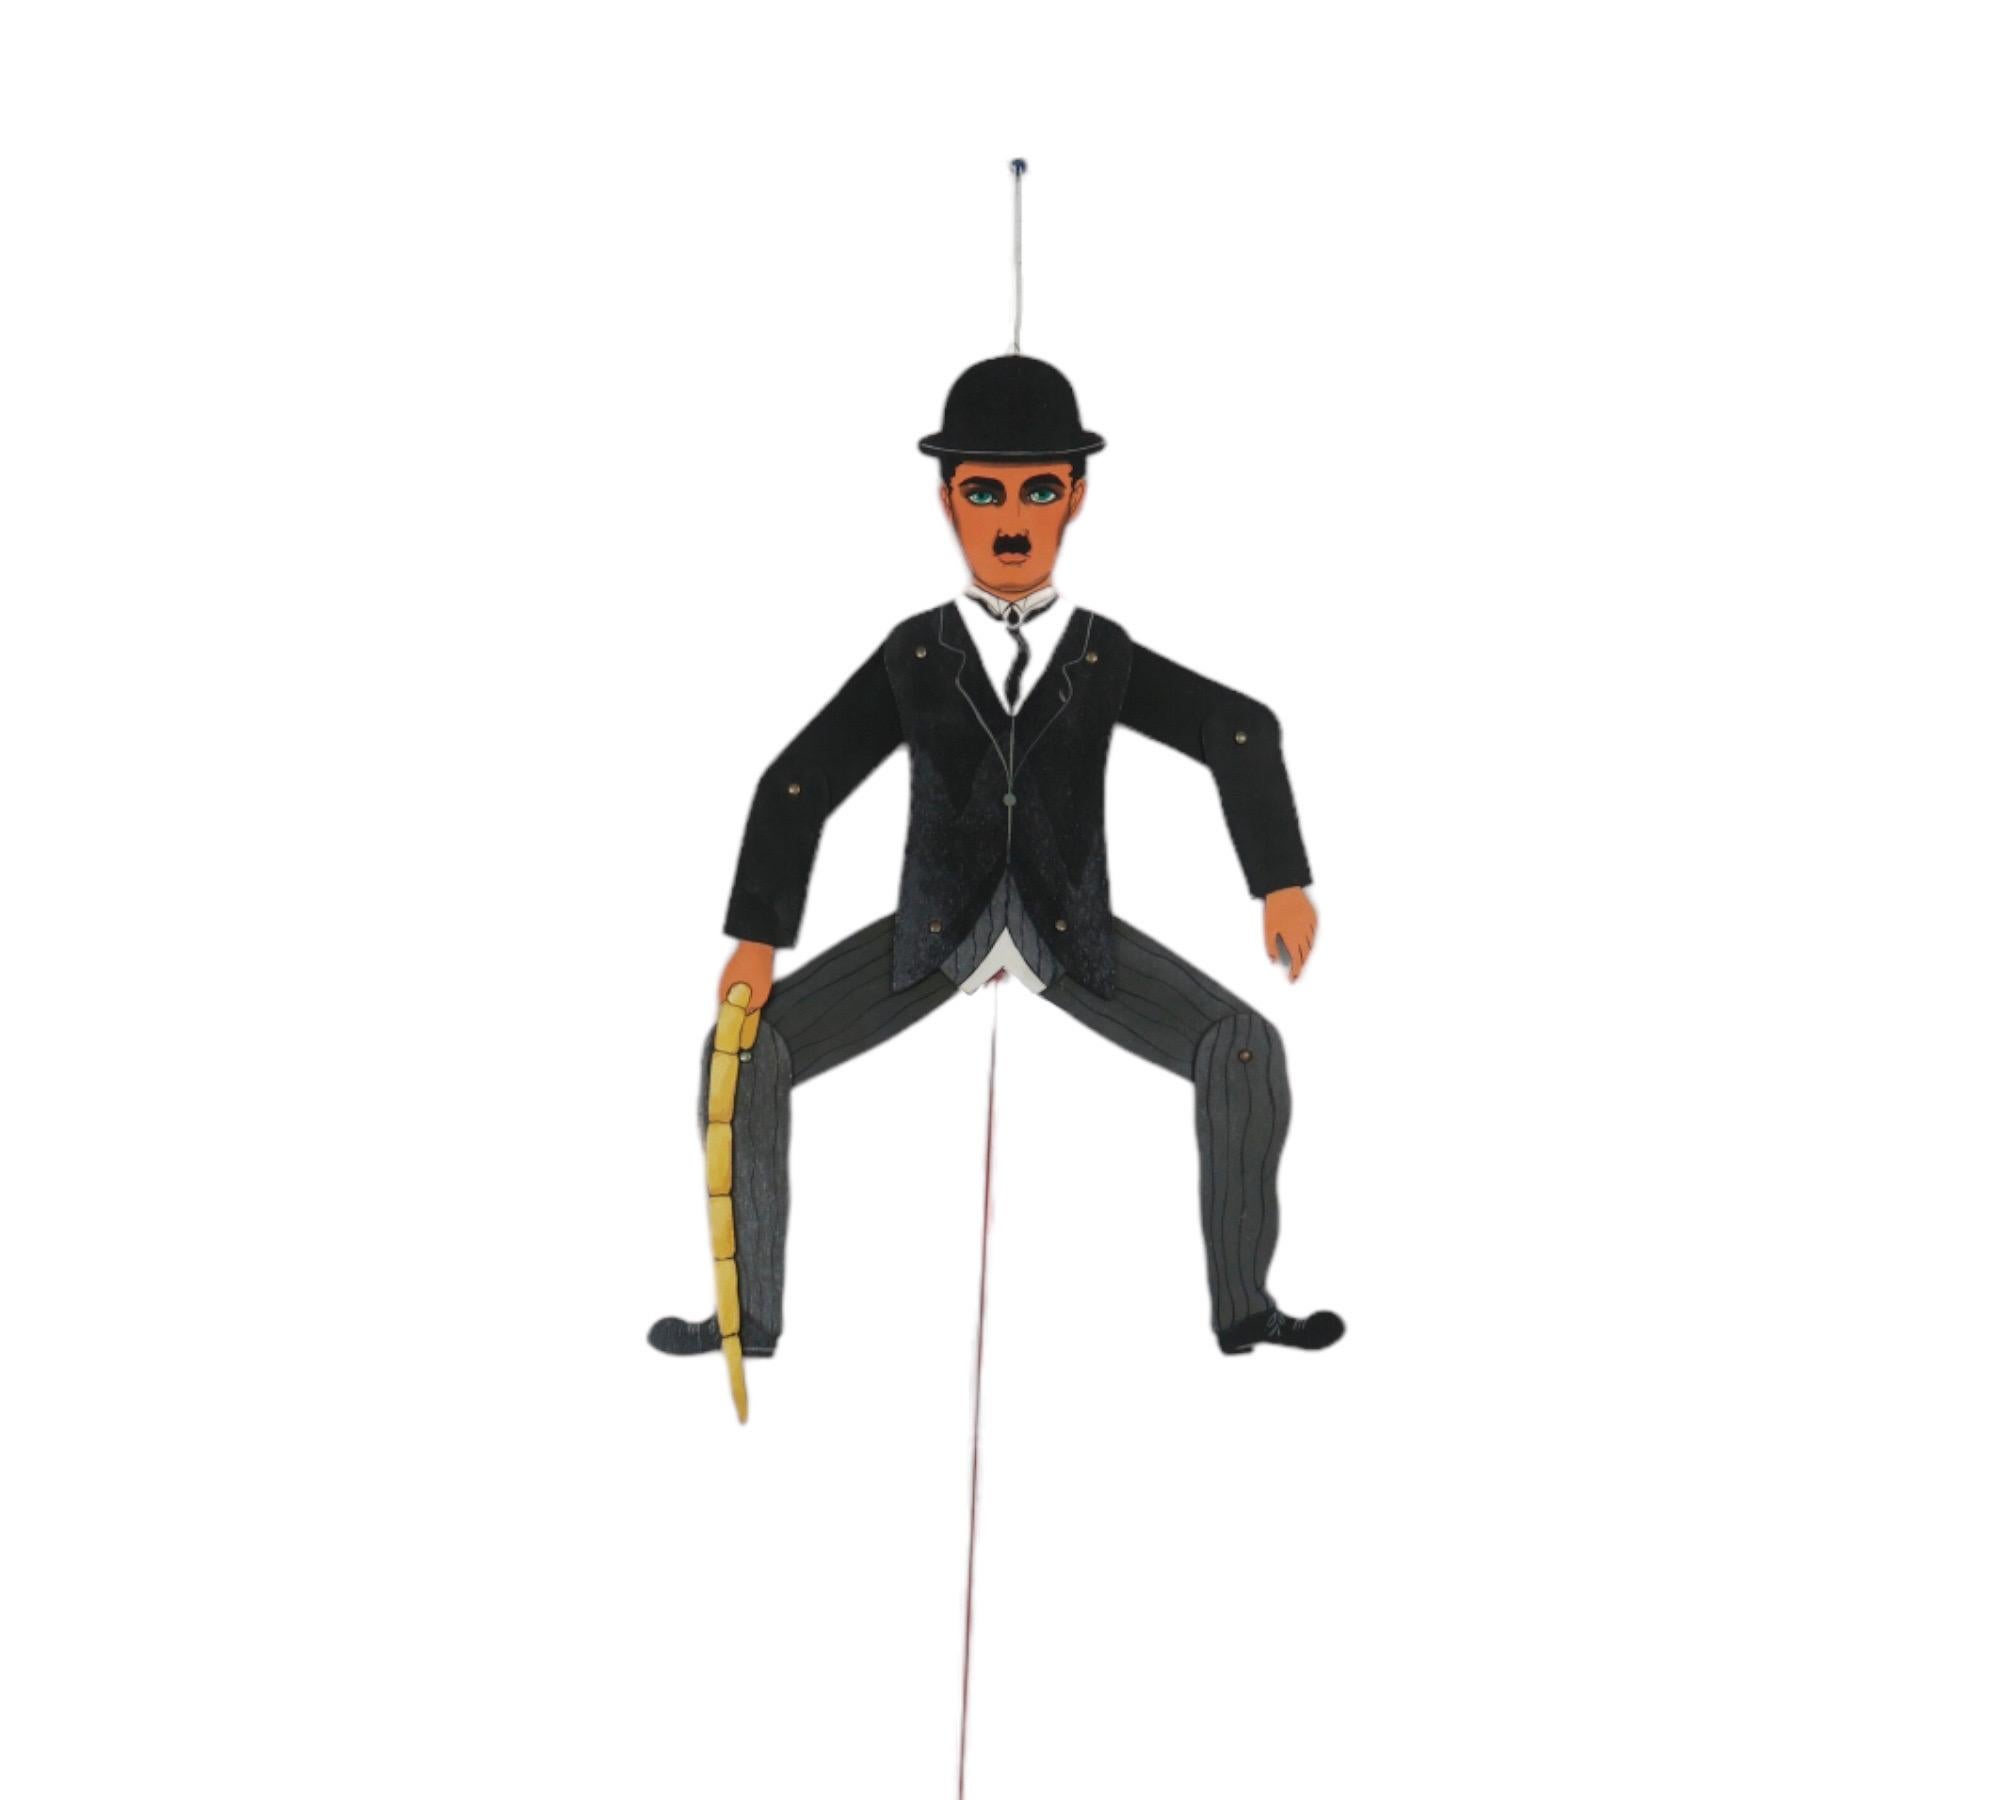 A Charlie Chaplin hanging pullstring flat puppet. Pull the string and make him dance! The bowler hat and cane were Charlie Chaplin's trademarks and indispensable props to his famous Tramp guise. Chaplin recalled how the costume induced the